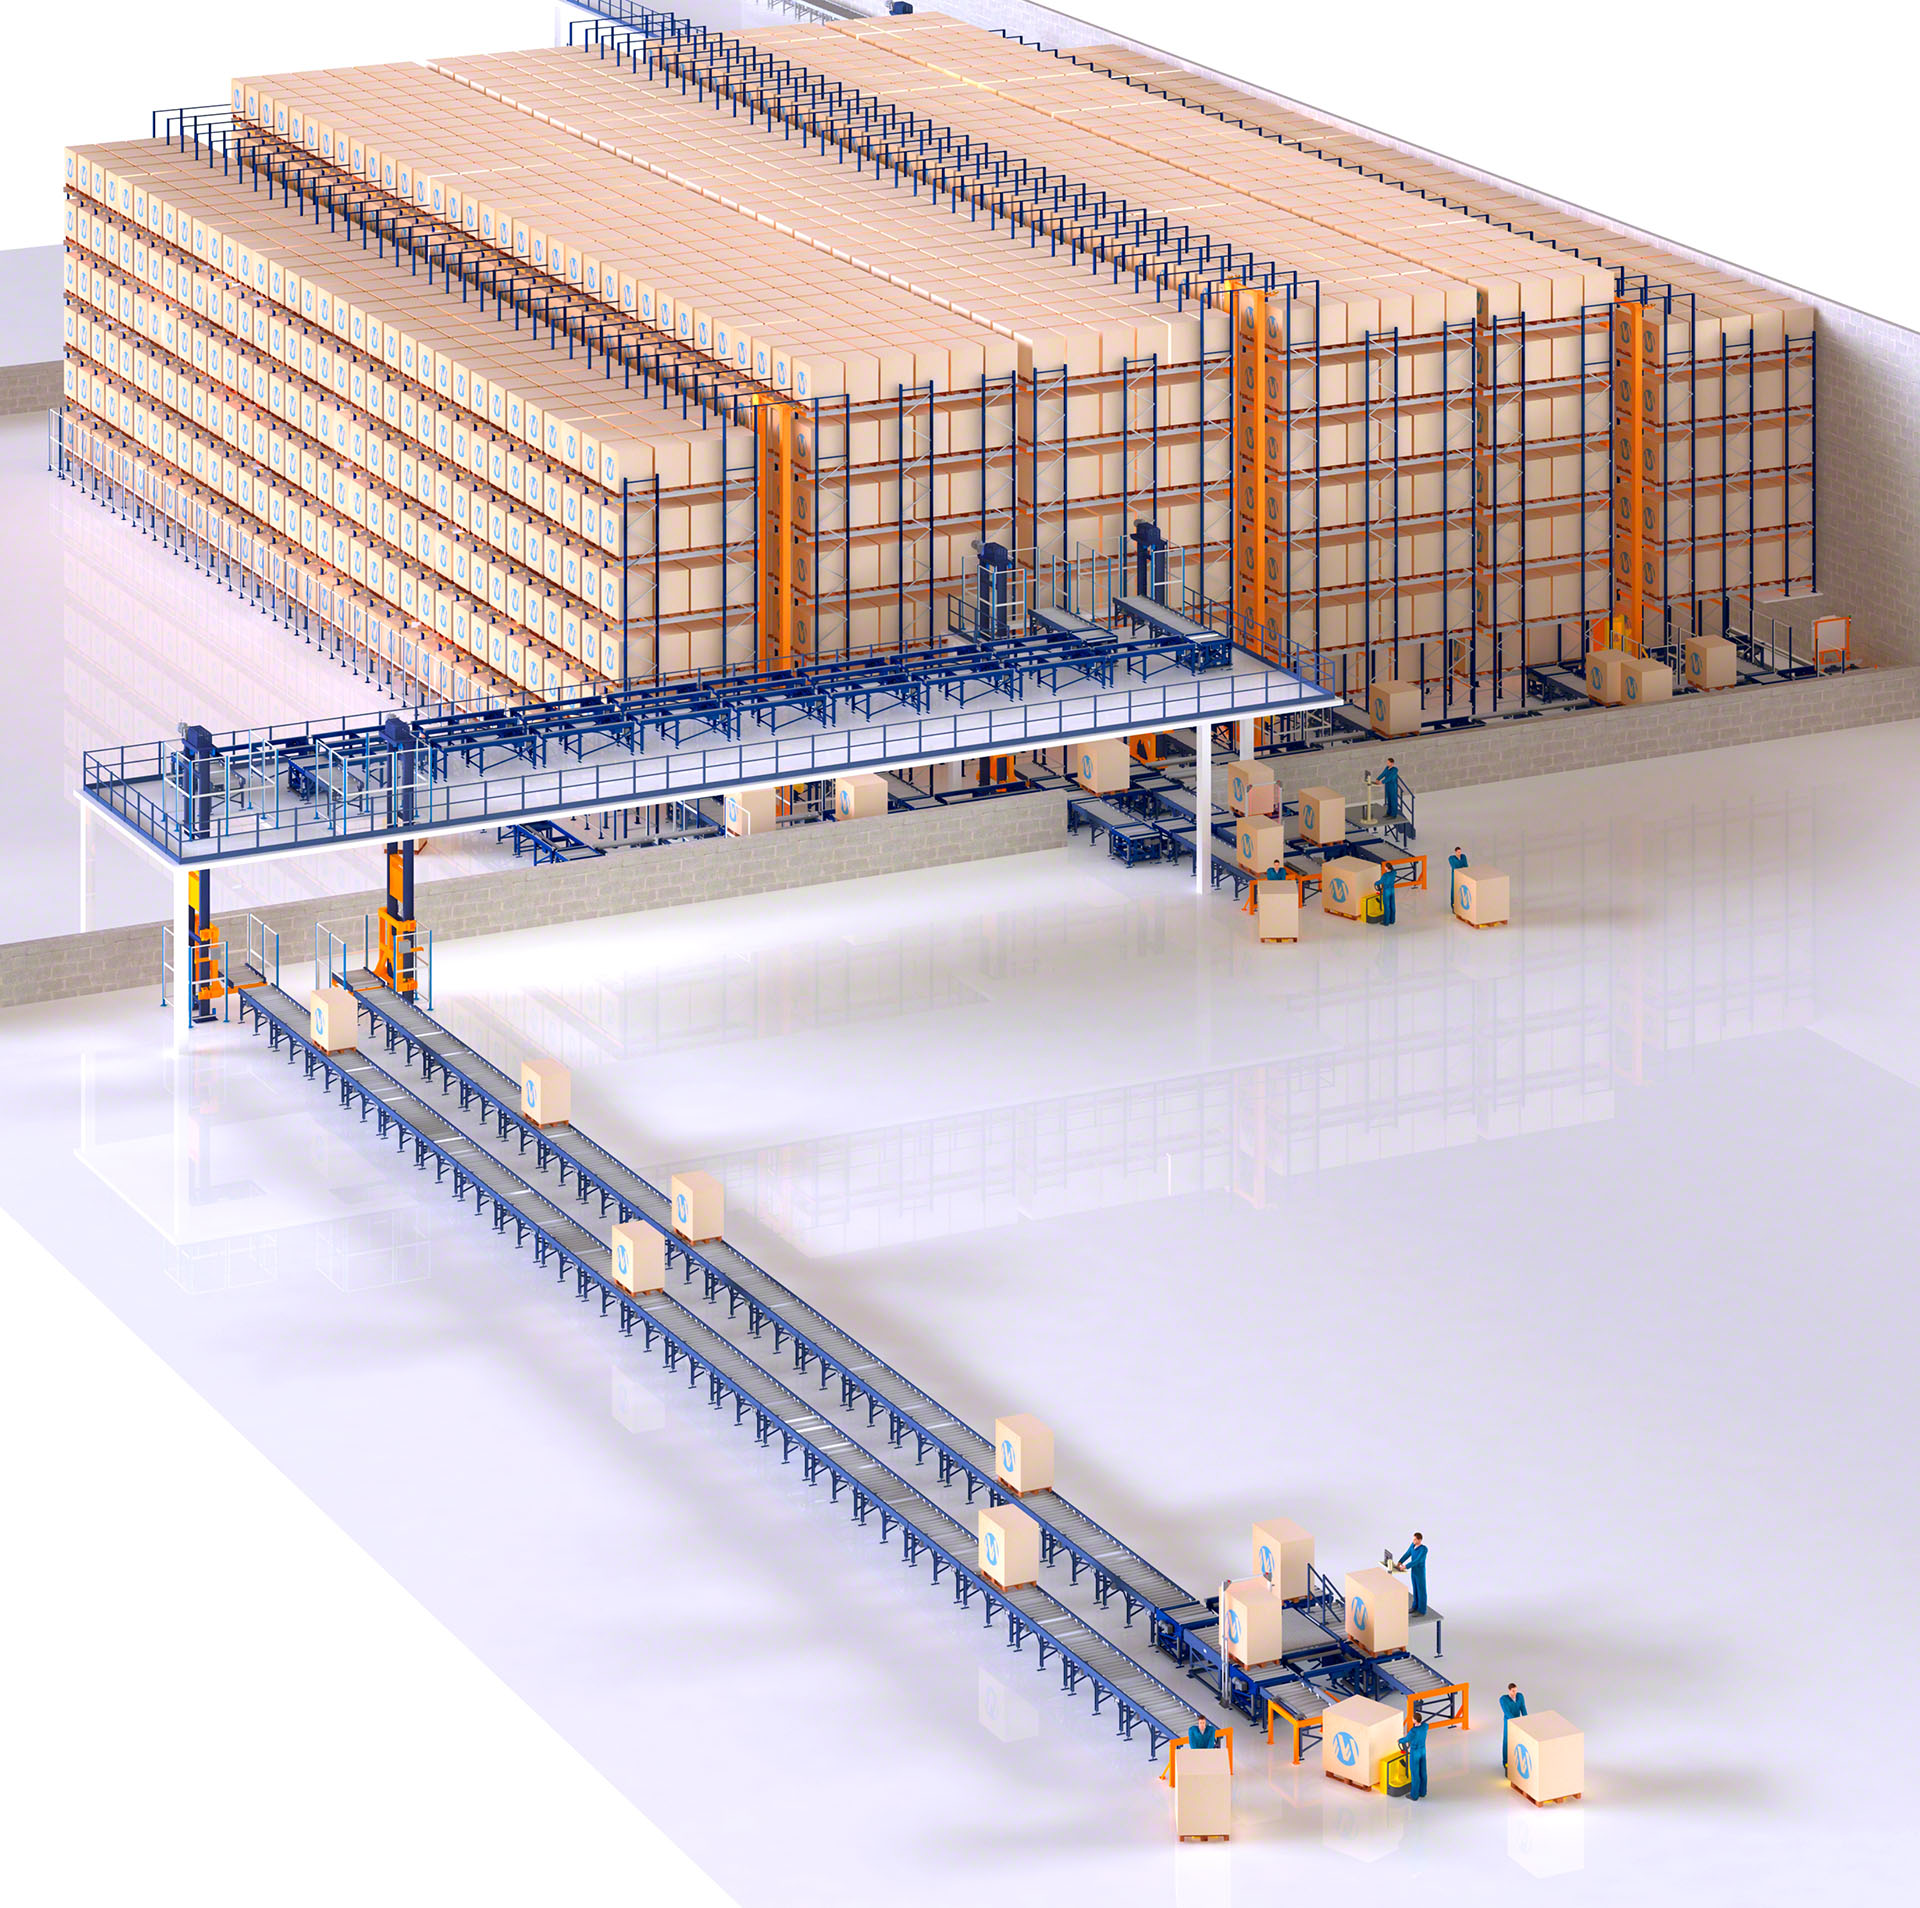 Automatic Pallet Shuttle system can be adapted to low-bay warehouses